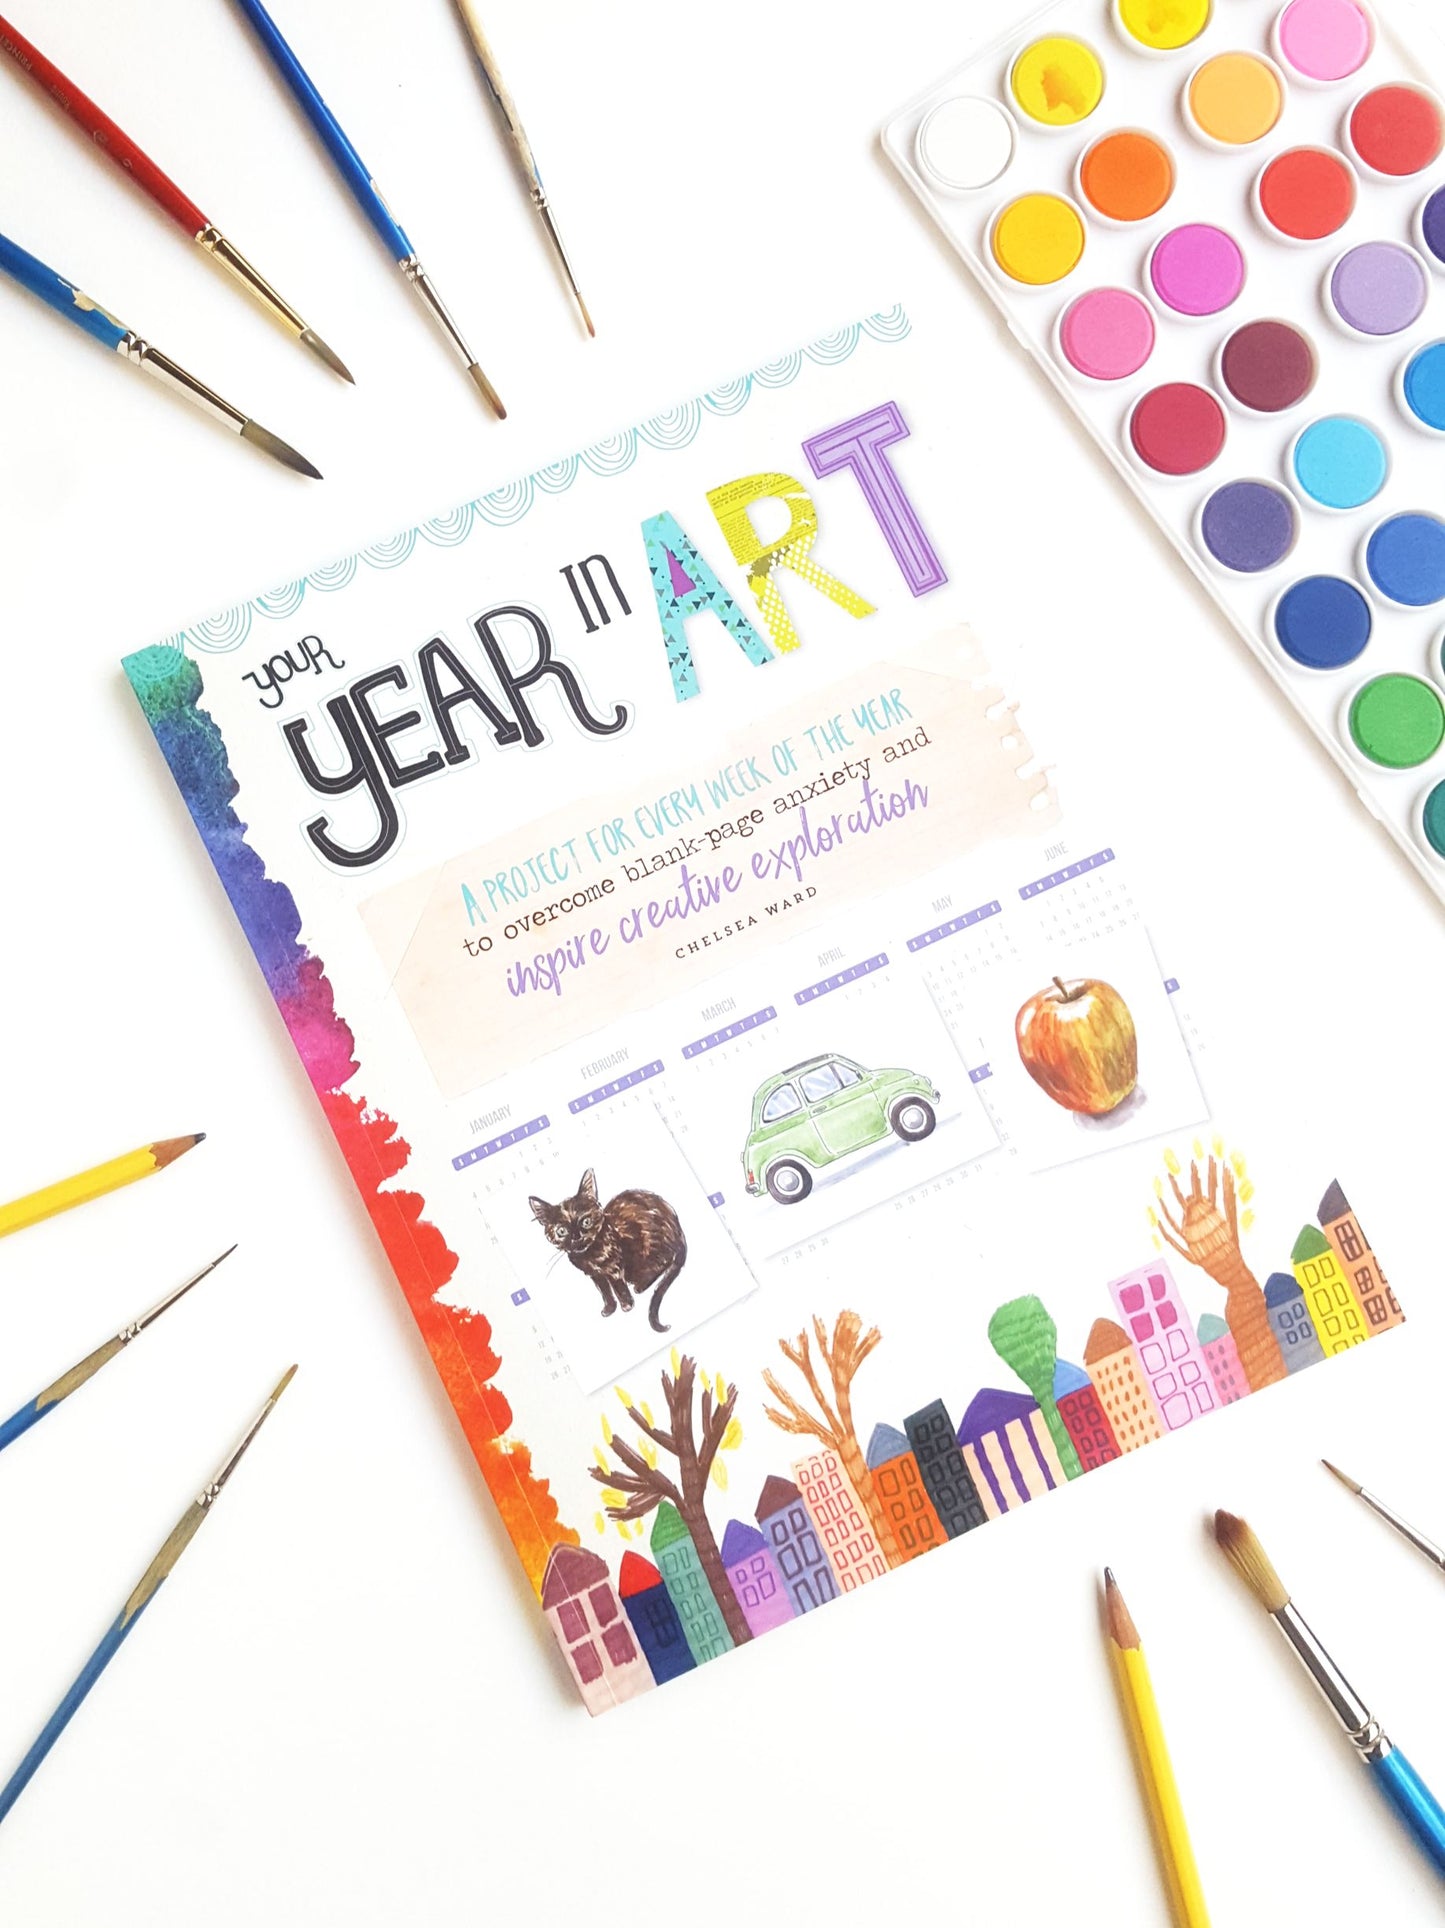 Your Year in Art - Signed Copy